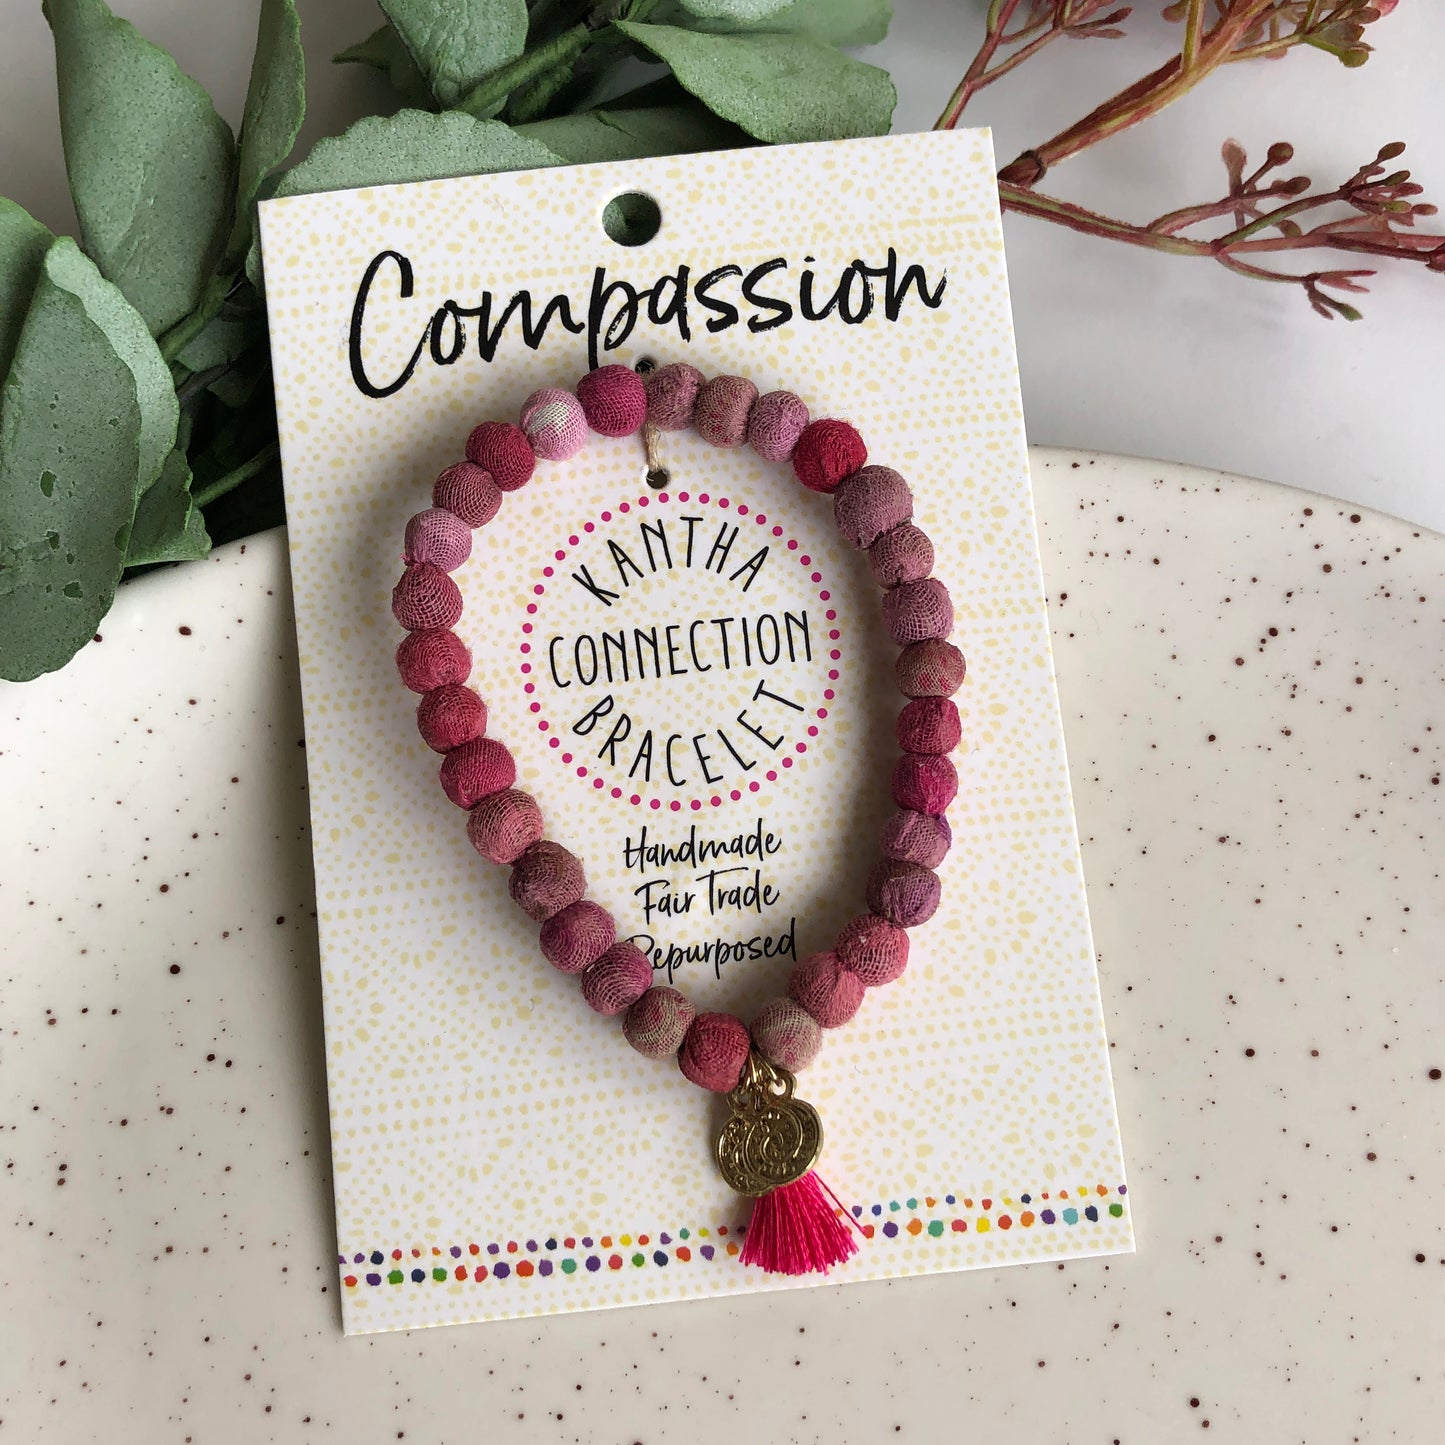 Load image into Gallery viewer, Compassion Kantha Connection Bracelet
